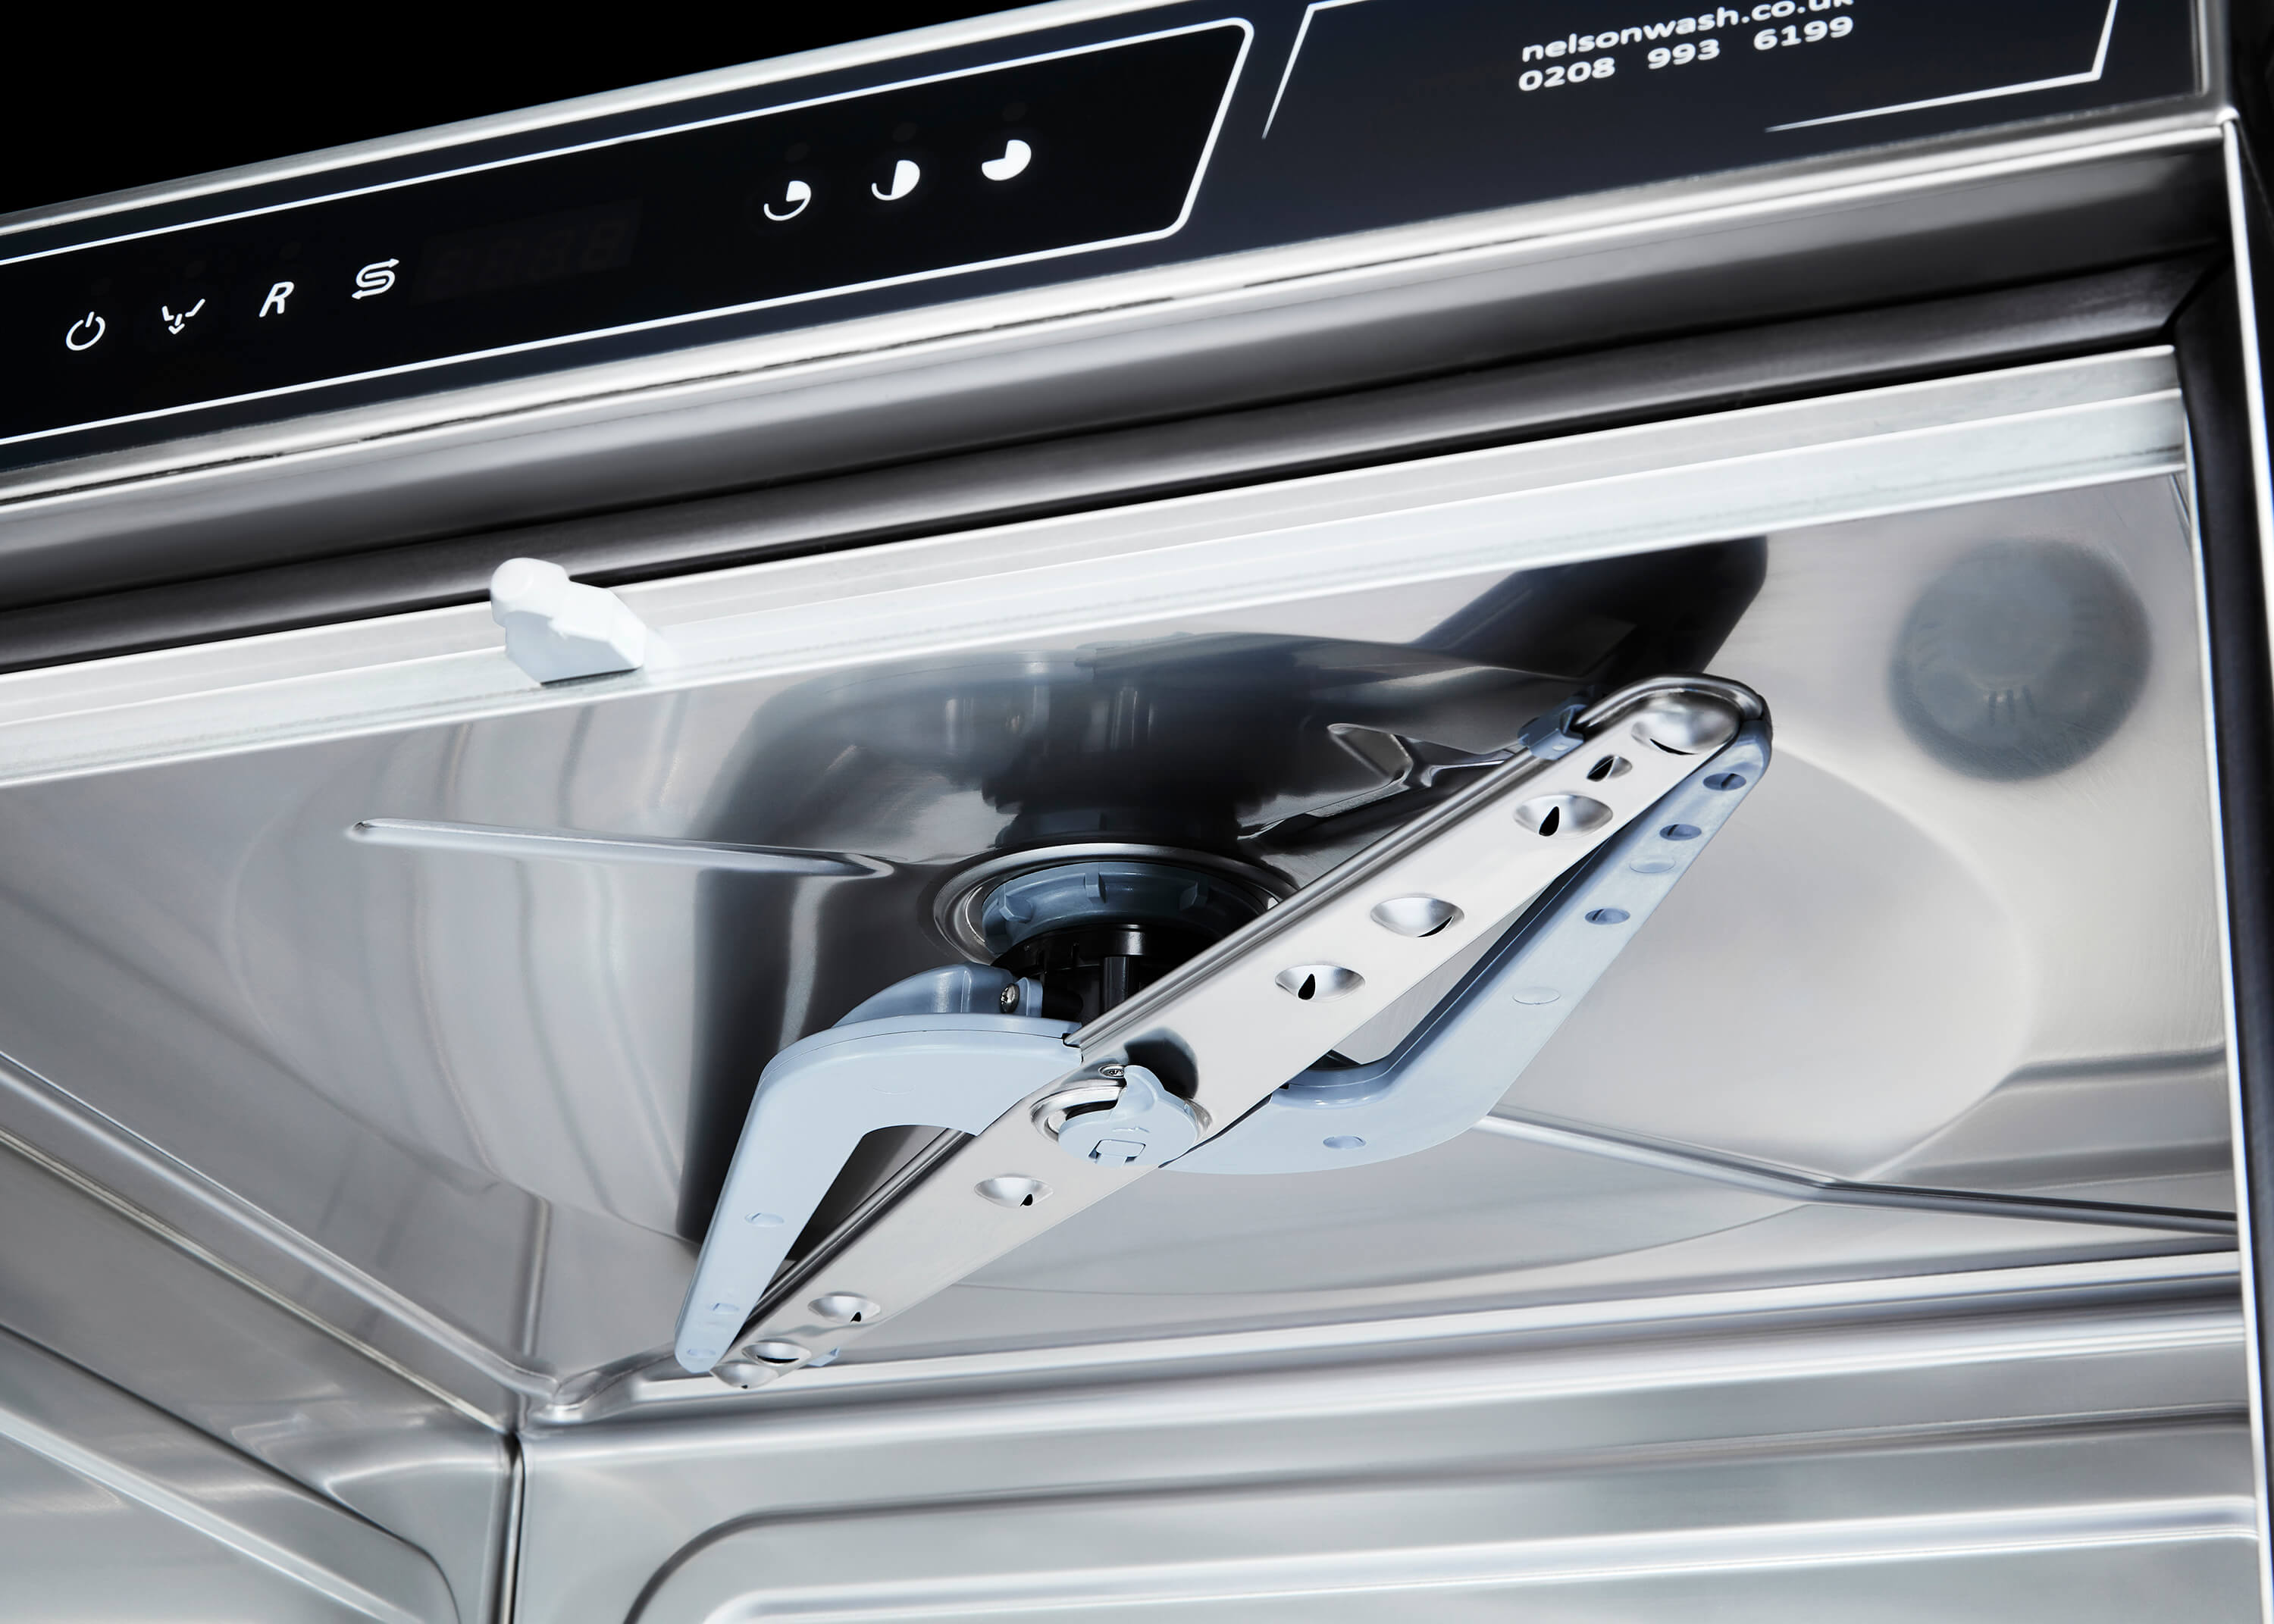 The upper wash and rinse arms on the Speedwash commercial dishwasher range